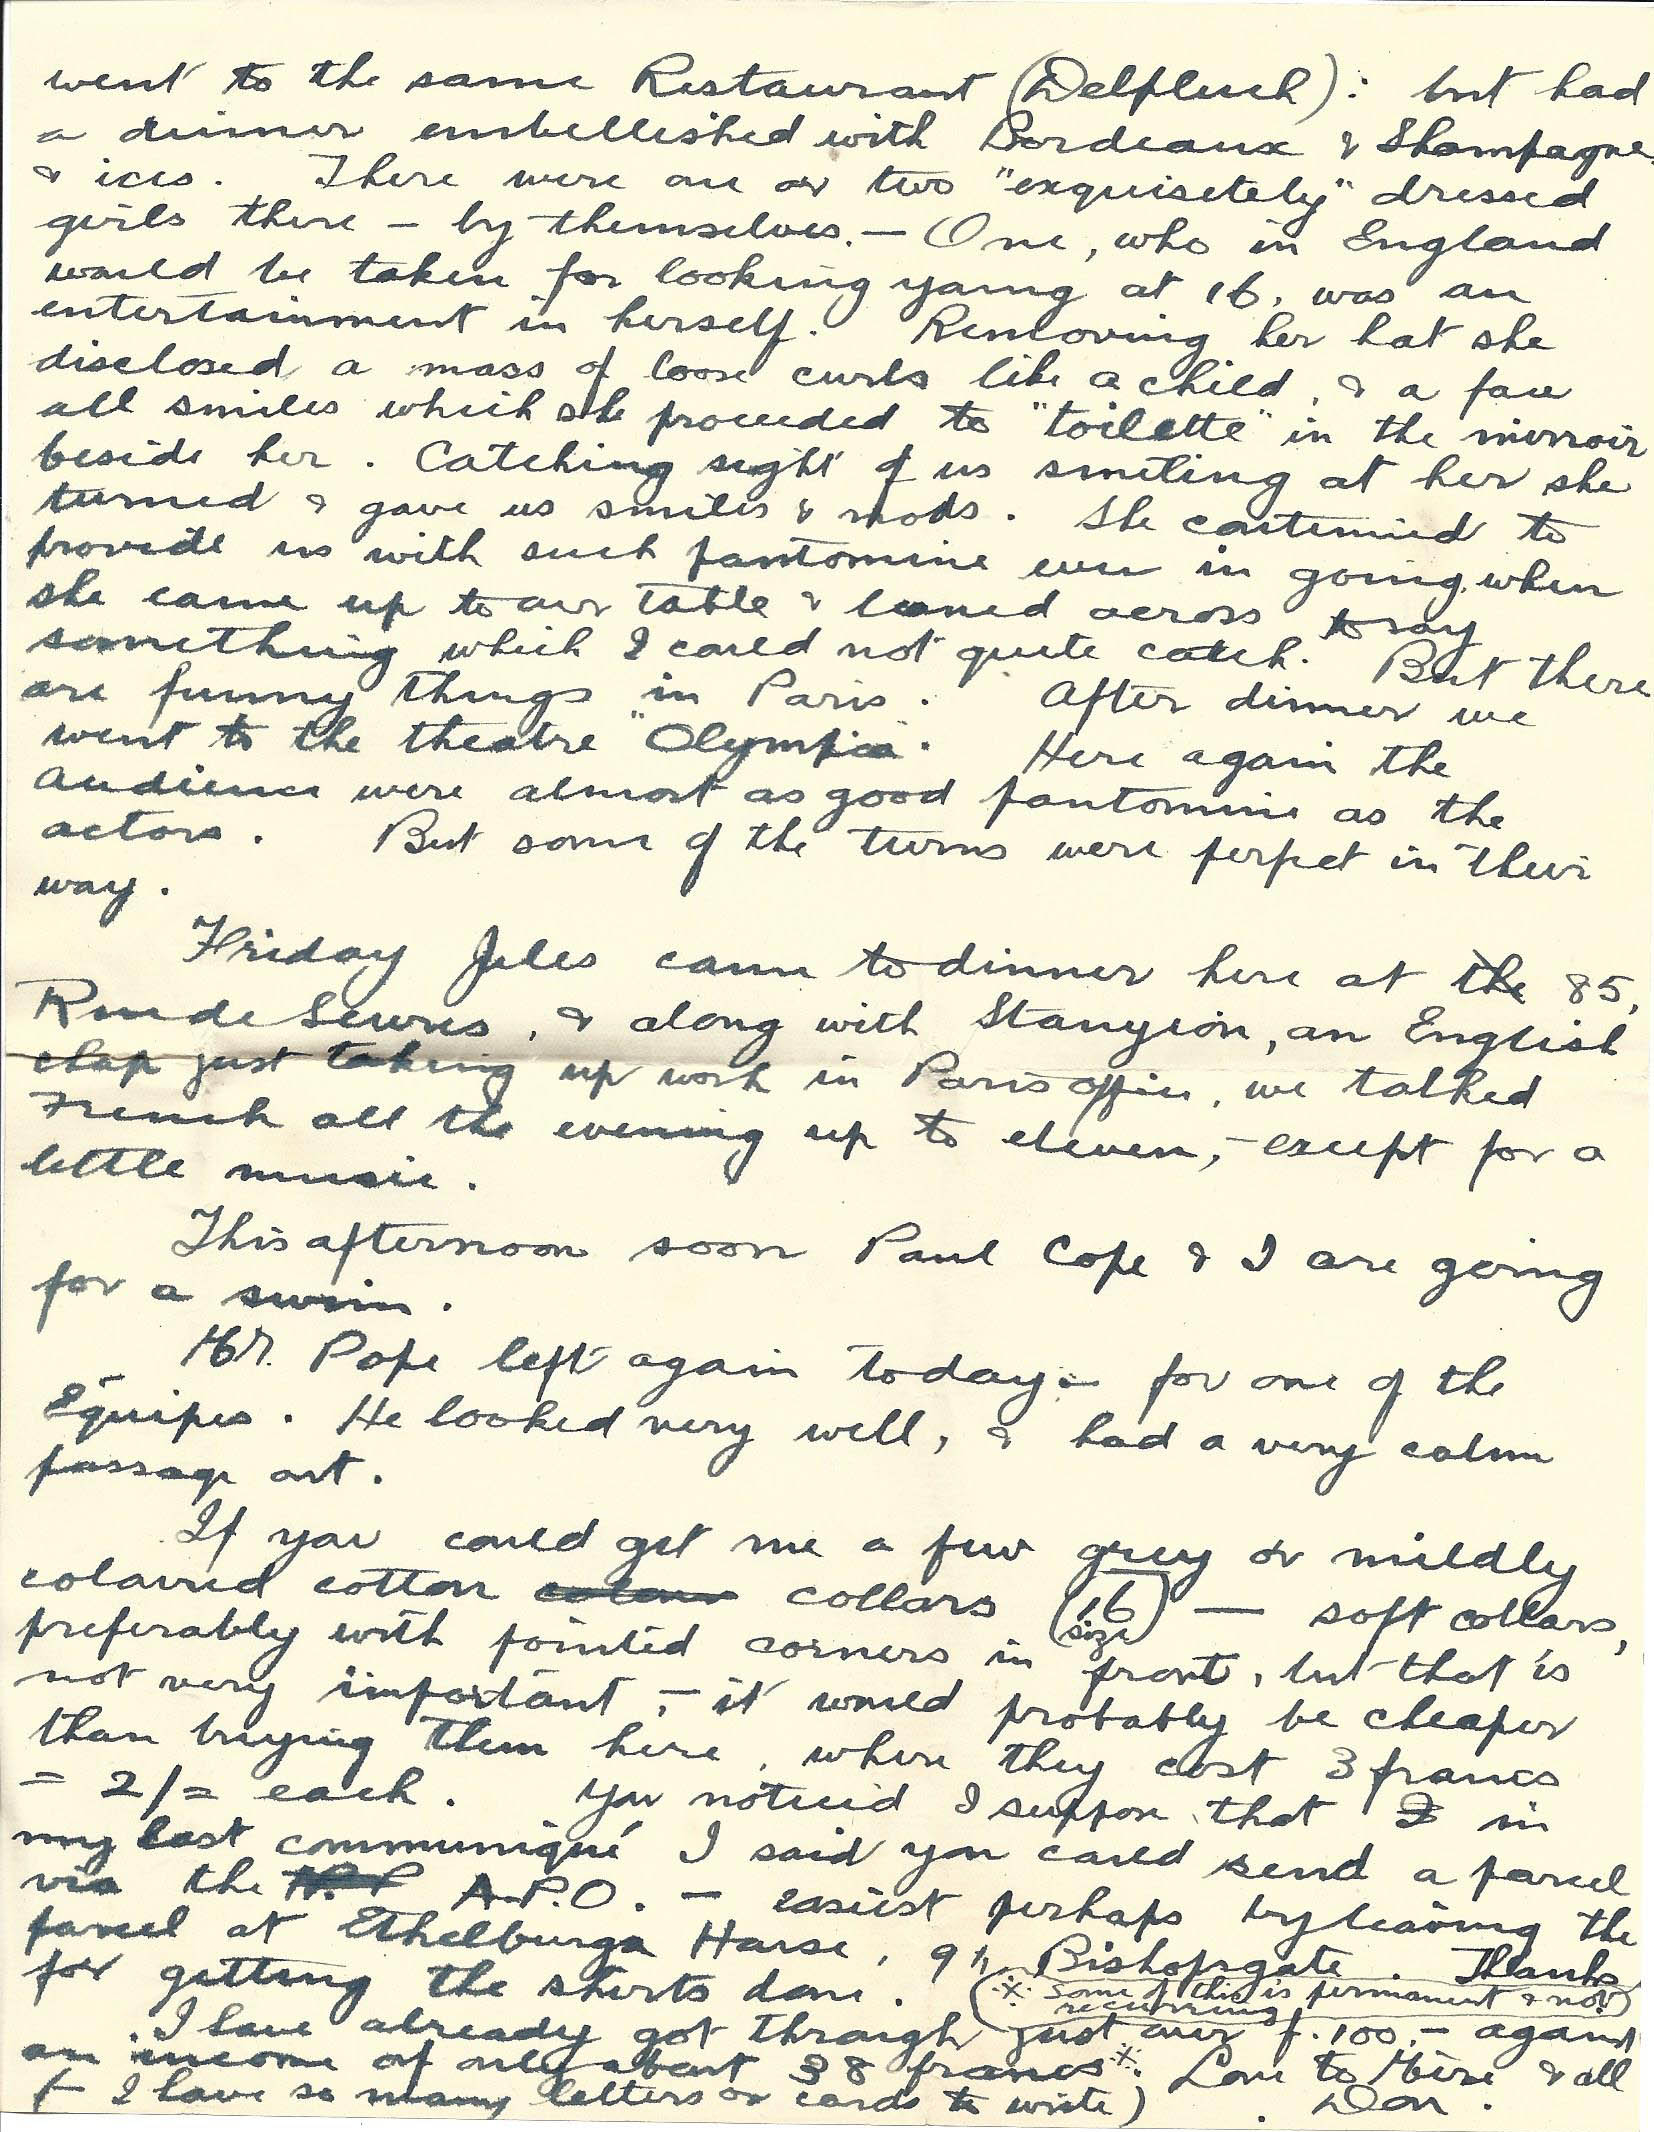 1919-08-09 p2 Donald Bearman letter to his father